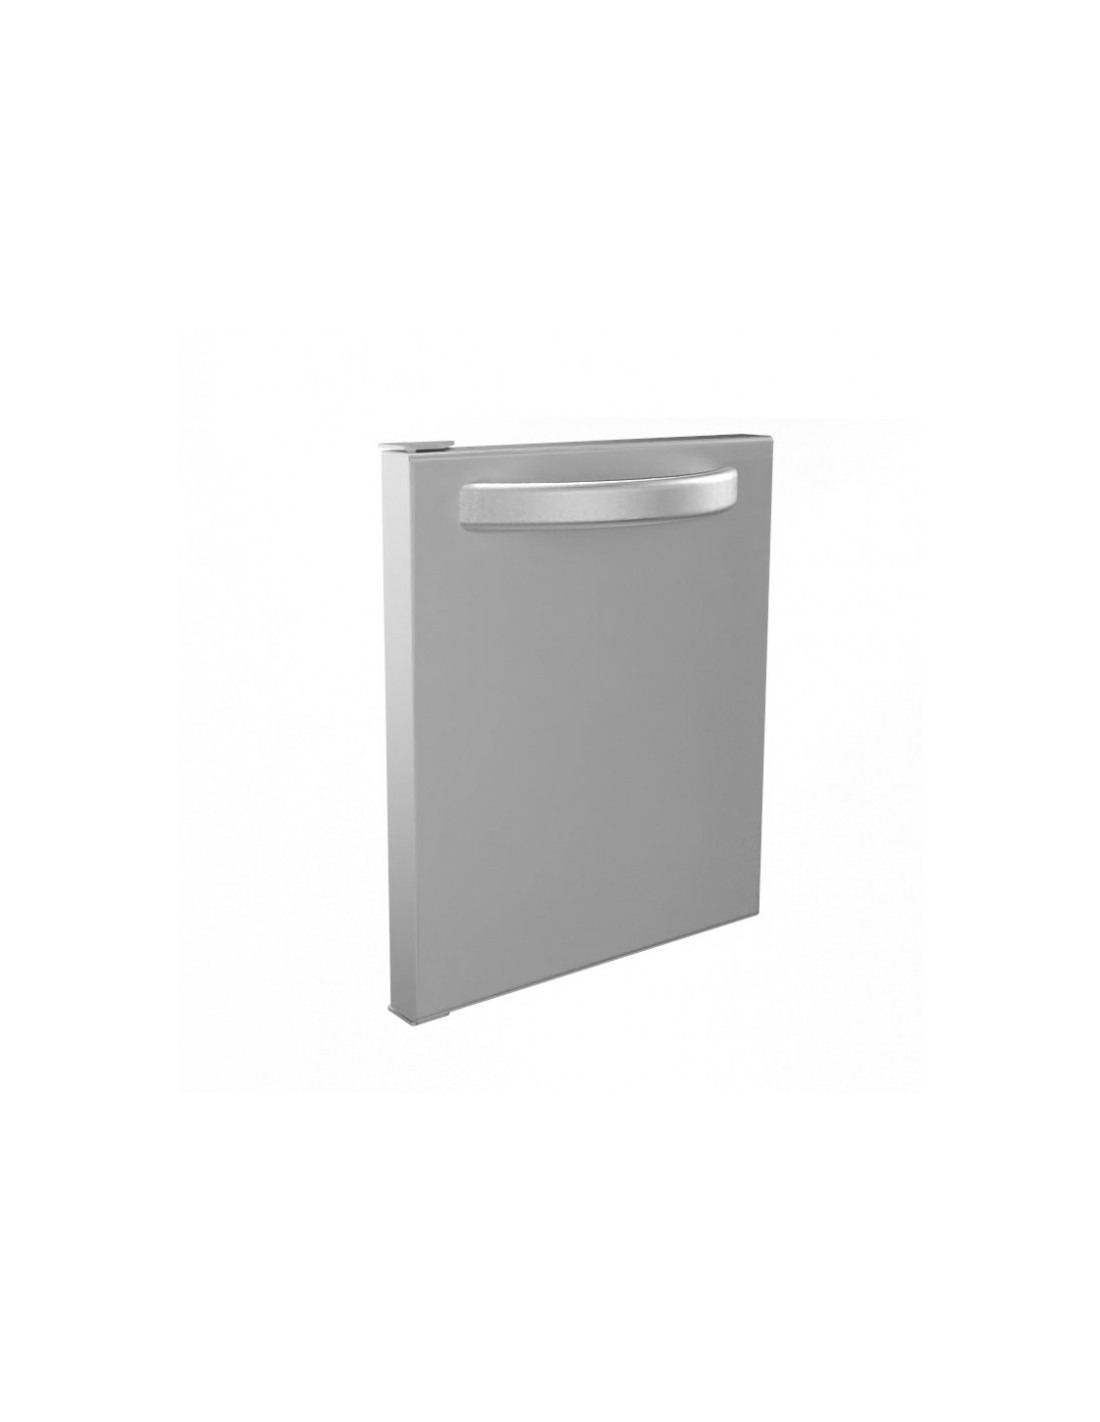 Hinged door with athermal handle and M40 magnetic closure